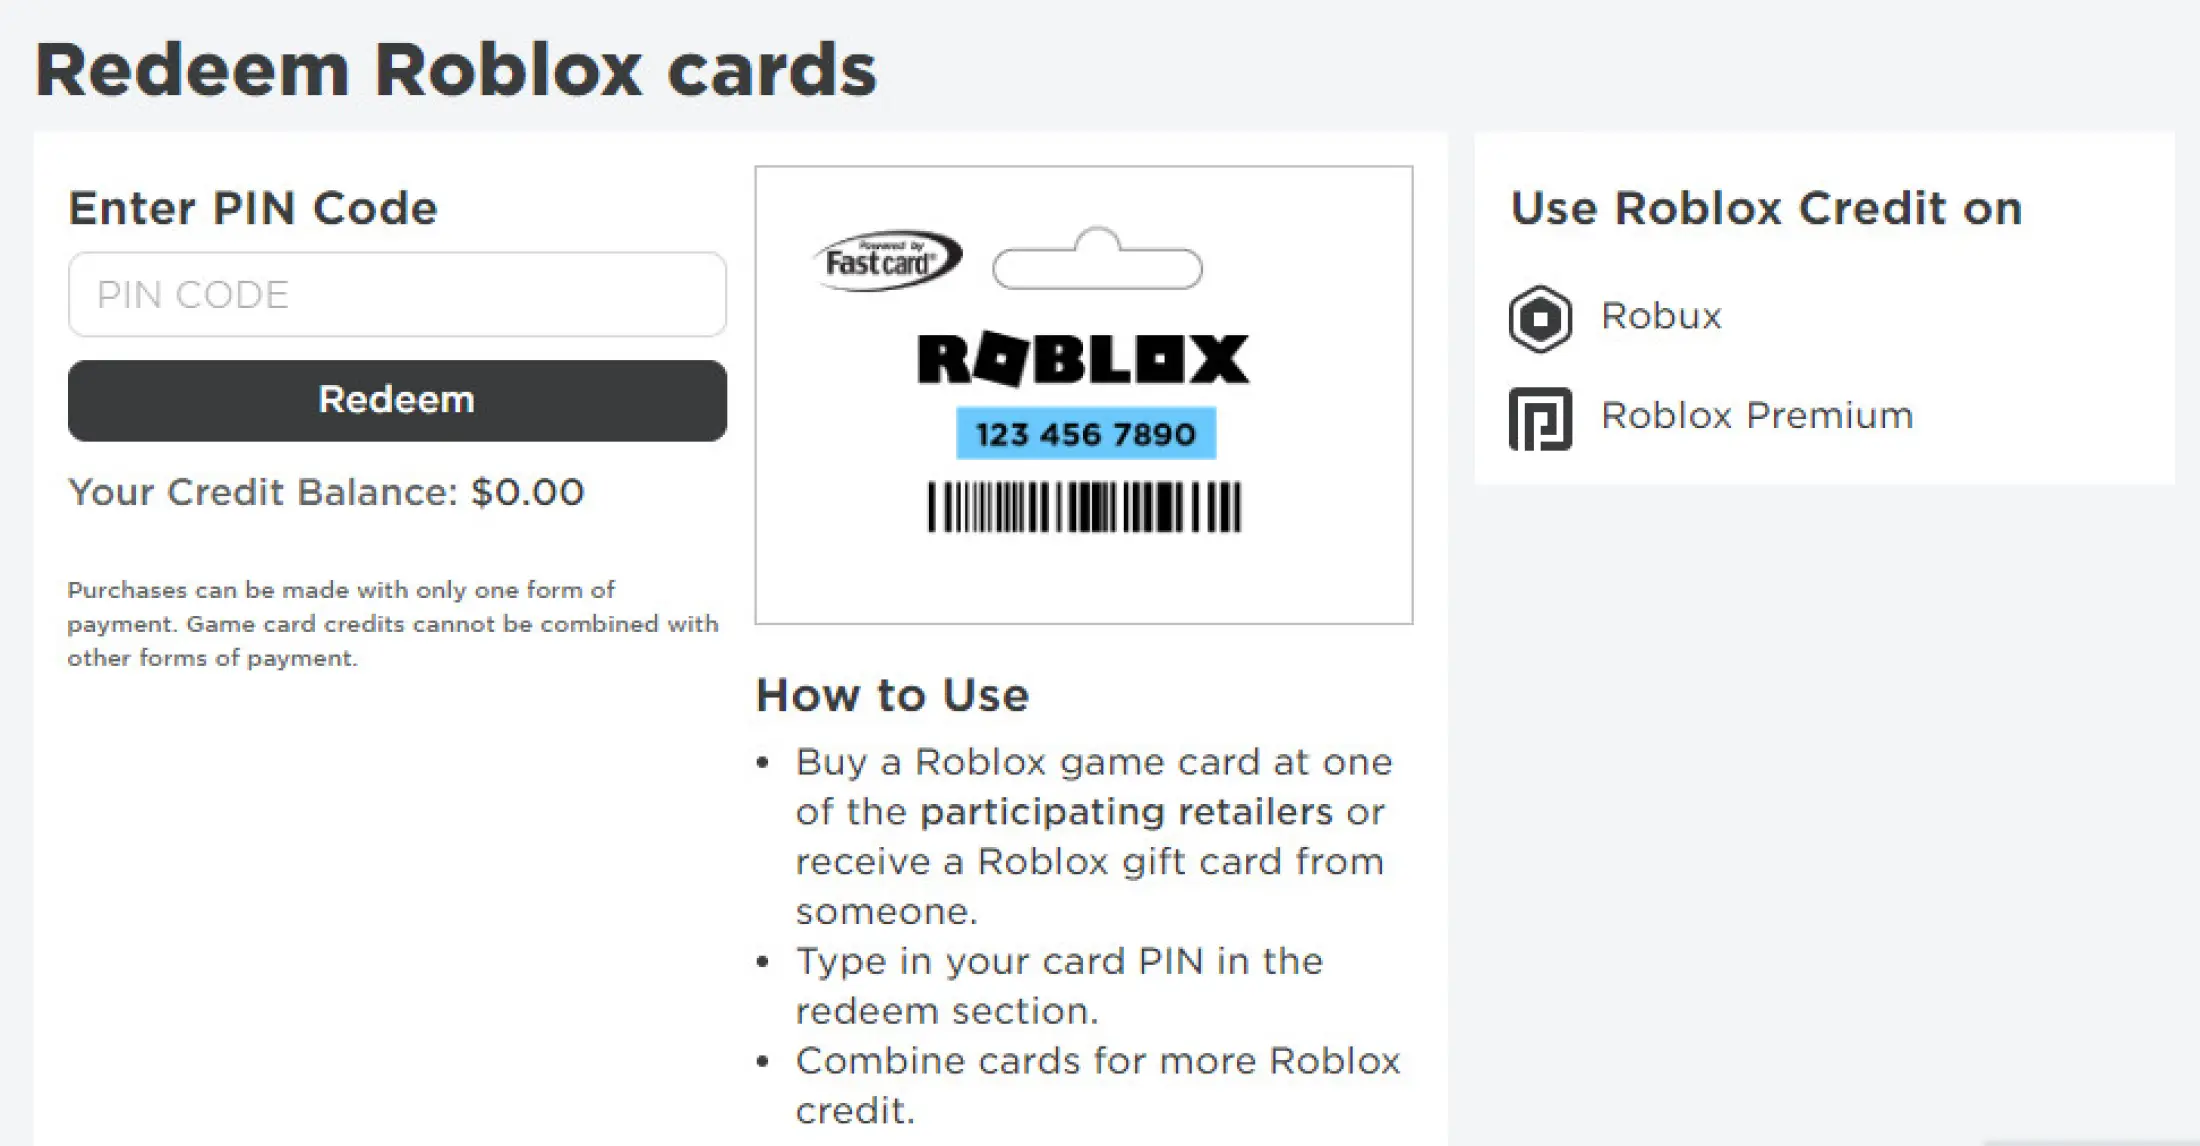 800 Robux 10 Roblox 15 Minute Fast Email Delivery Robux Code Gaming Mogul Lazada Ph - 800 robux picture